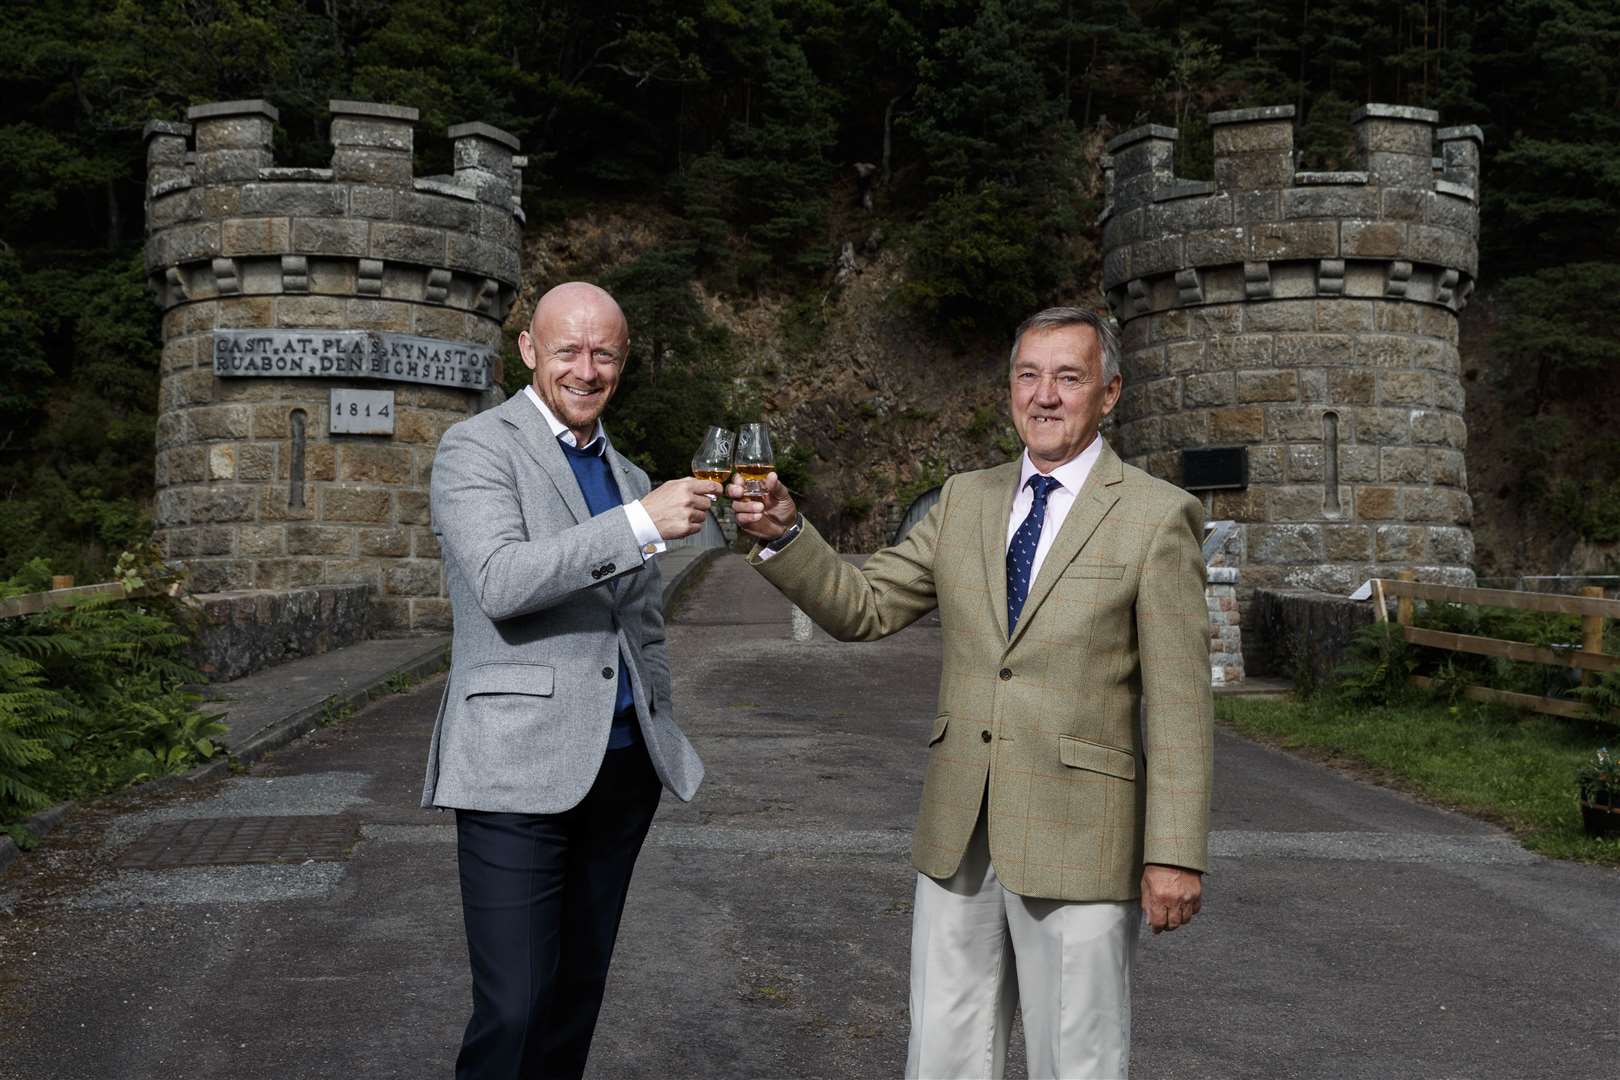 Spirit of Speyside Whisky Festival chair George McNeil (left) and outgoing chair James Campbell at Craigellachie Bridge. Picture: Ross Johnston/Newsline Media.